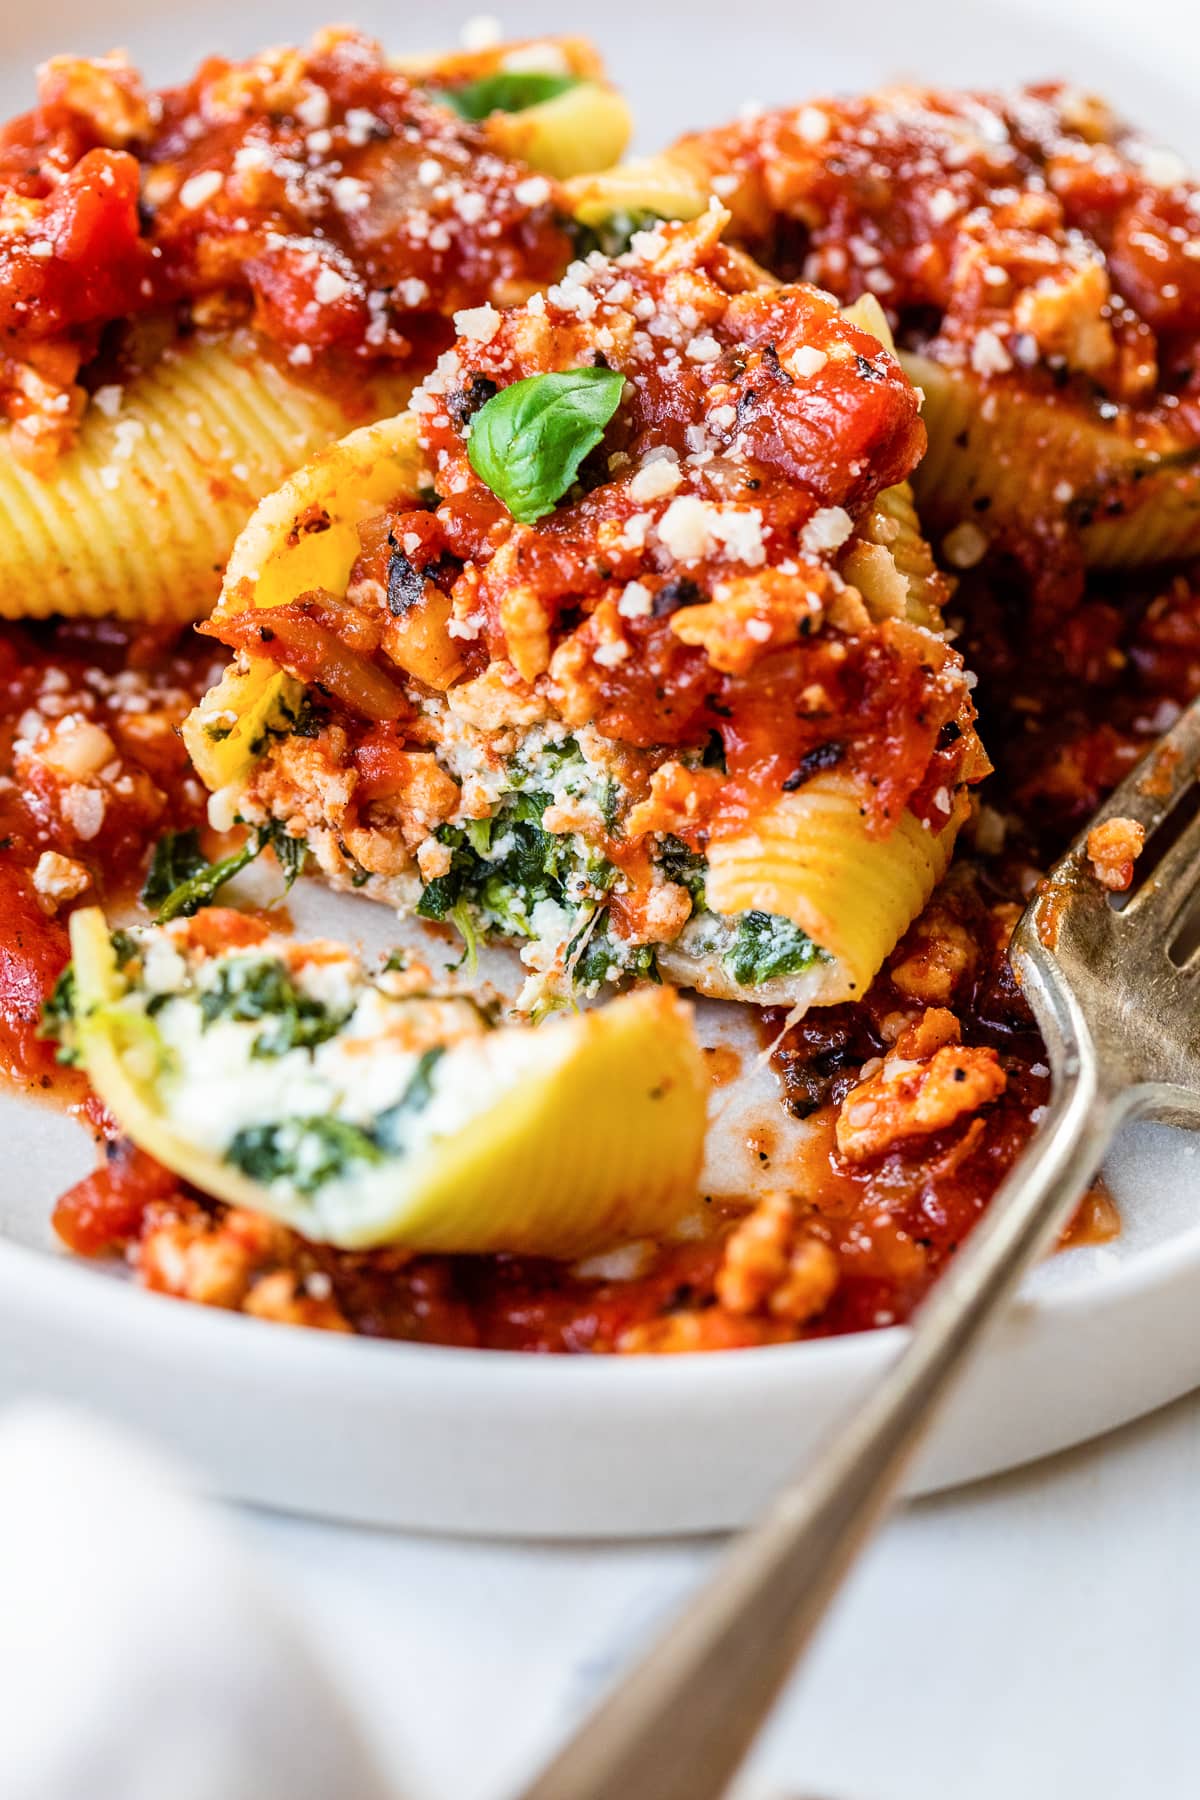 Spinach Stuffed Shells with Ground Turkey Meat Sauce